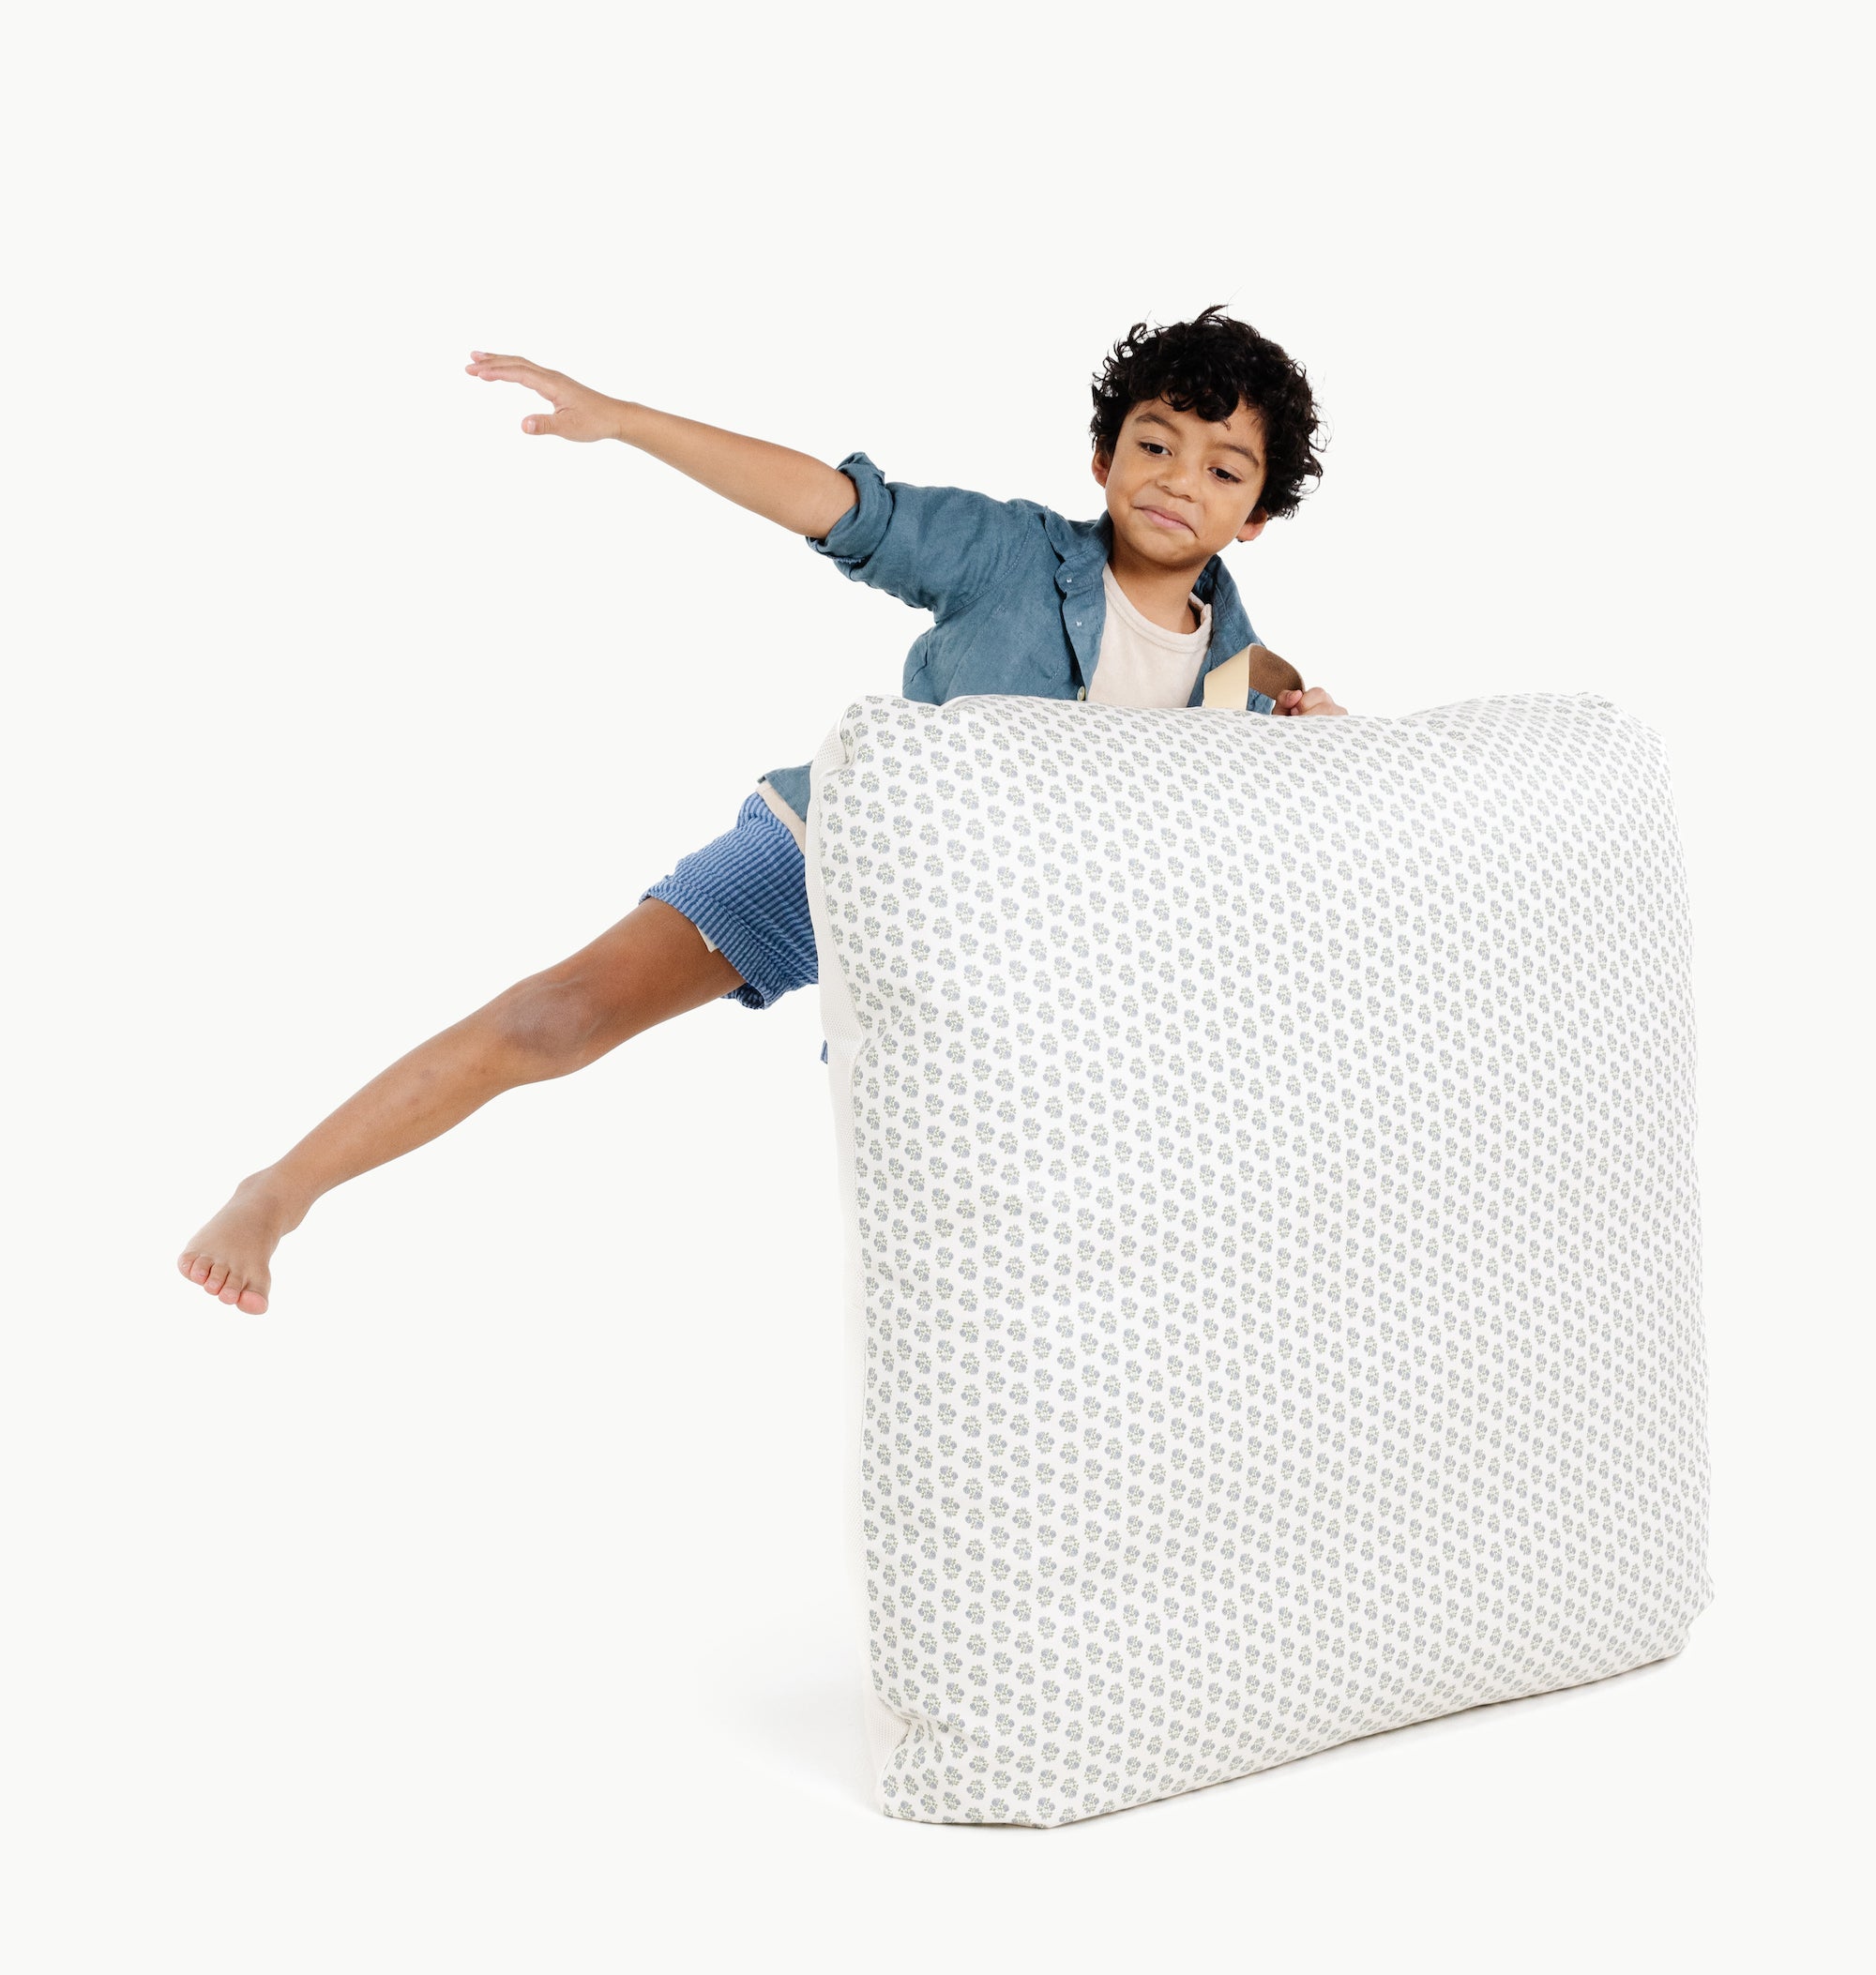 Meadow / Square@kid holding the meadow square floor cushion